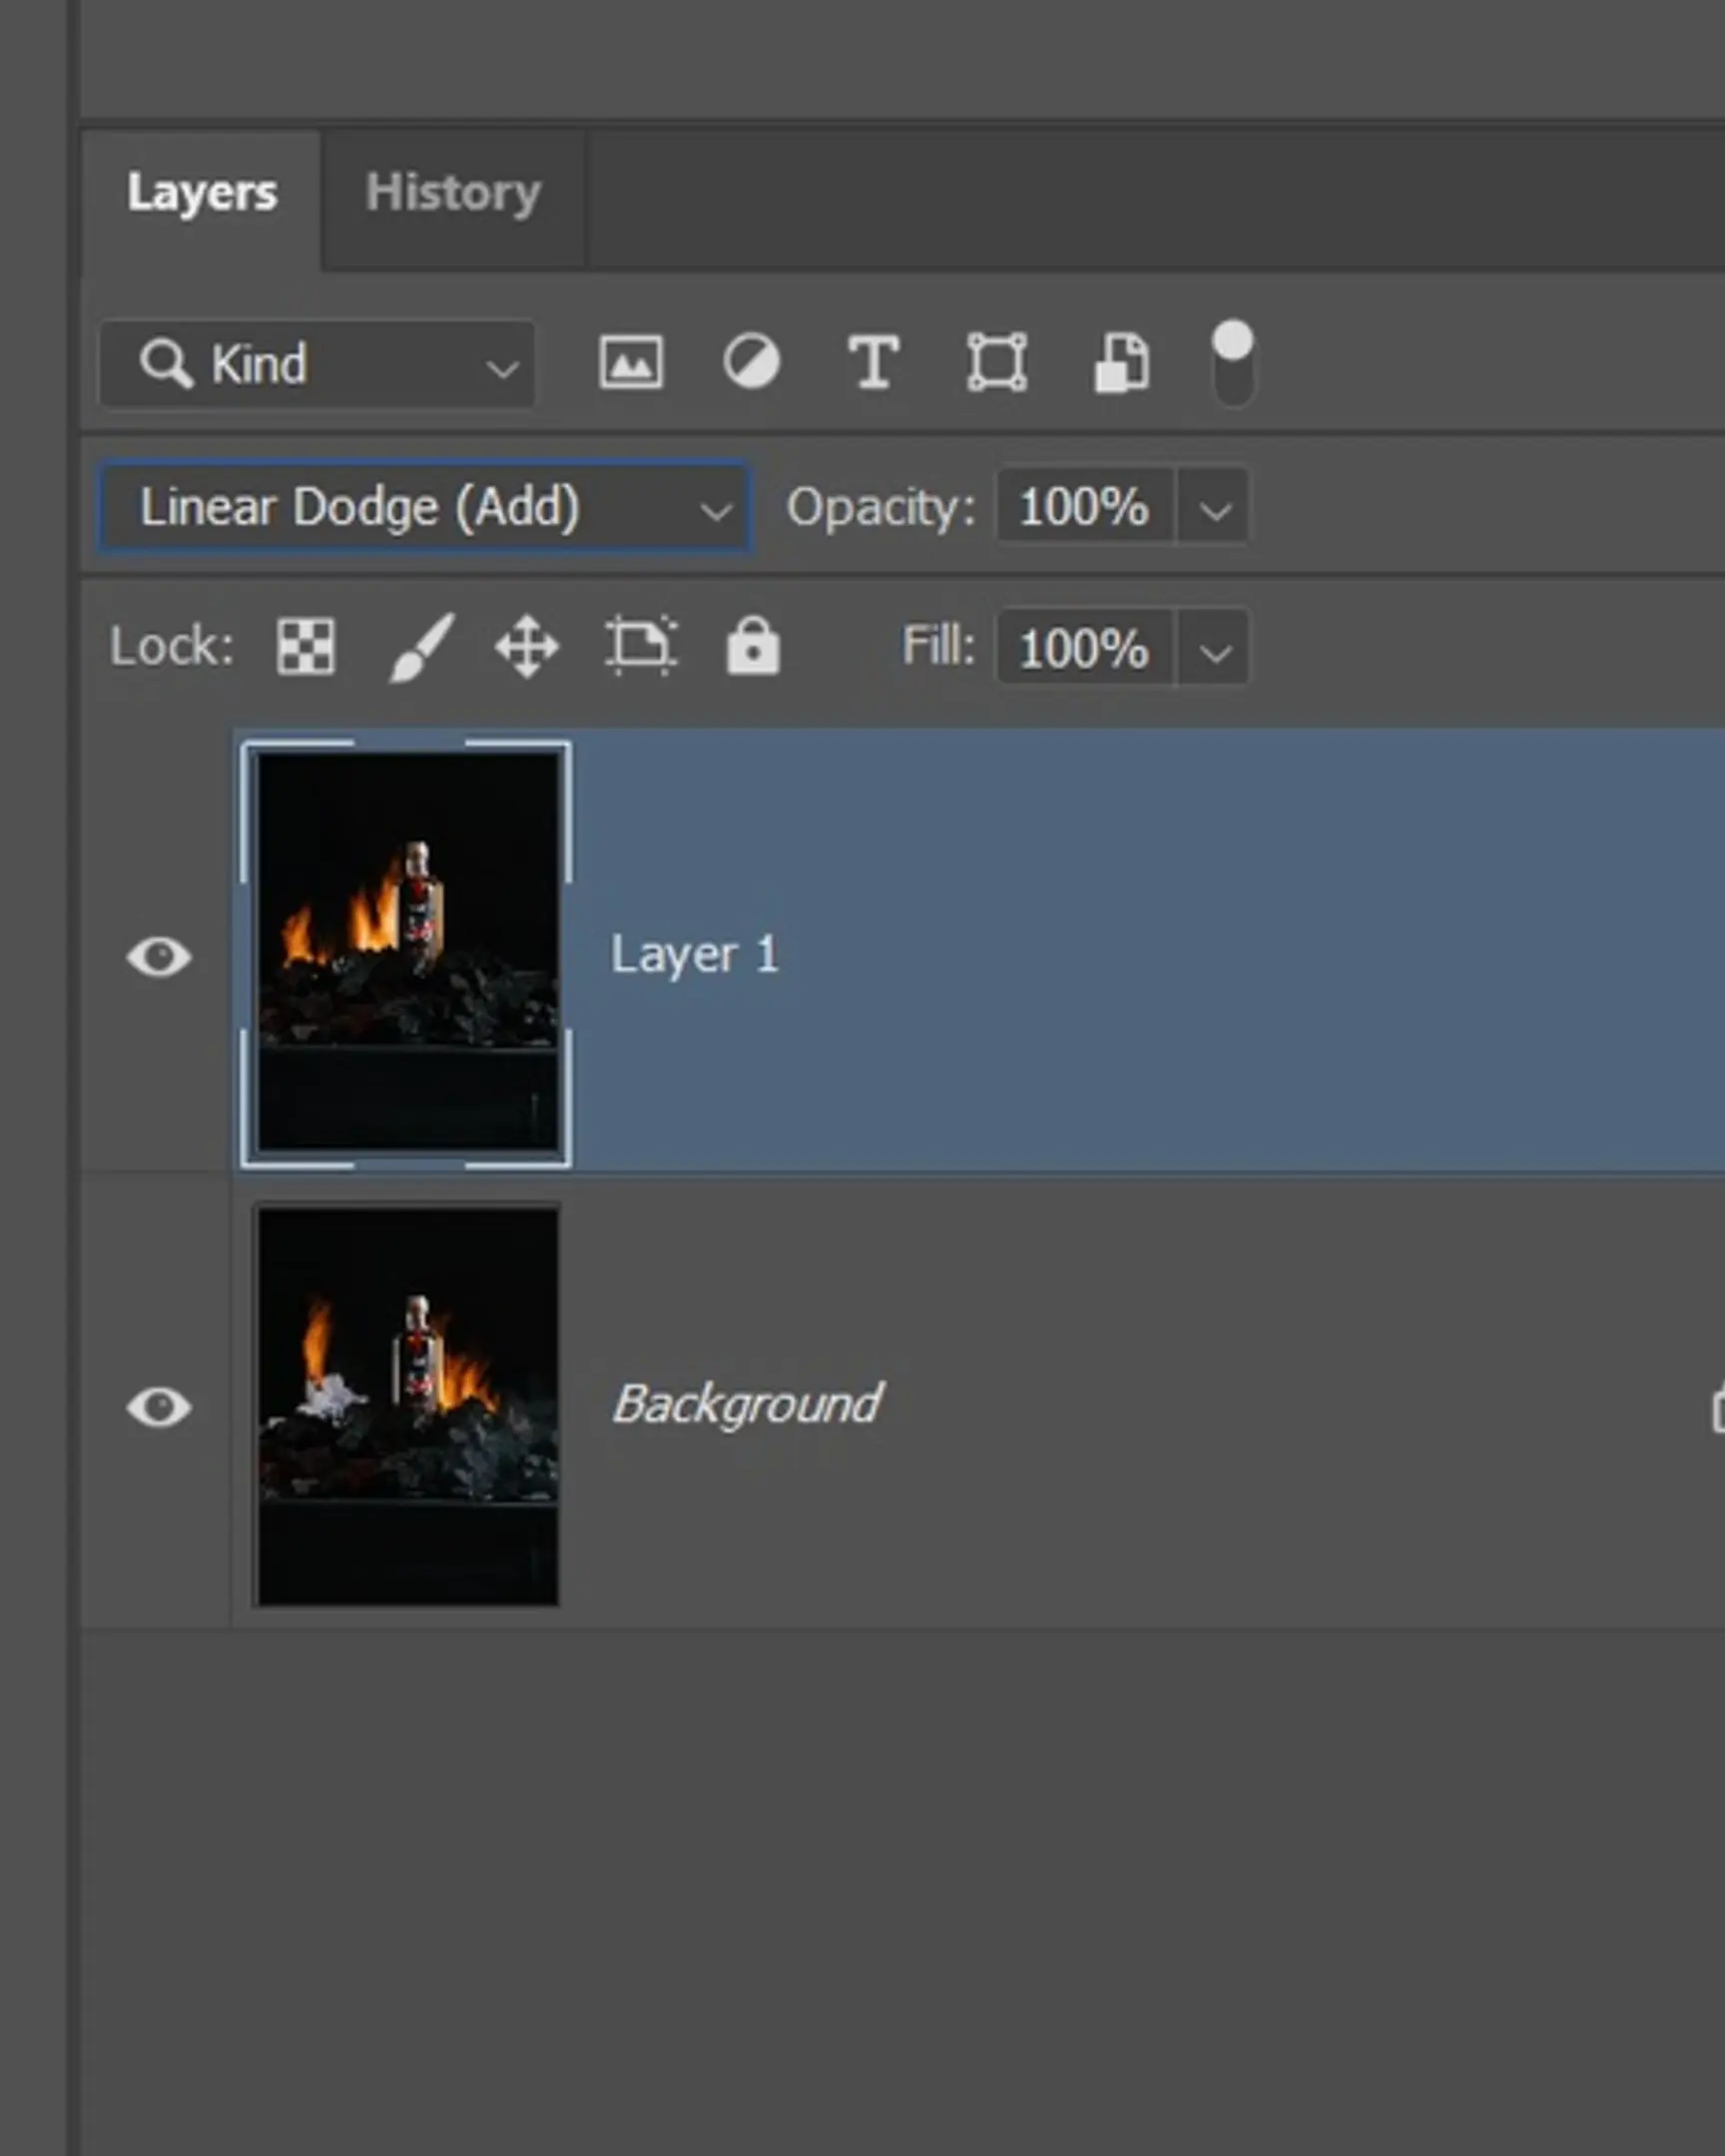 Photoshop layer in linear Dodge mode. The trick with “gluing” the light directly in photoshop. Photoshop layers in linear Dodge mode.